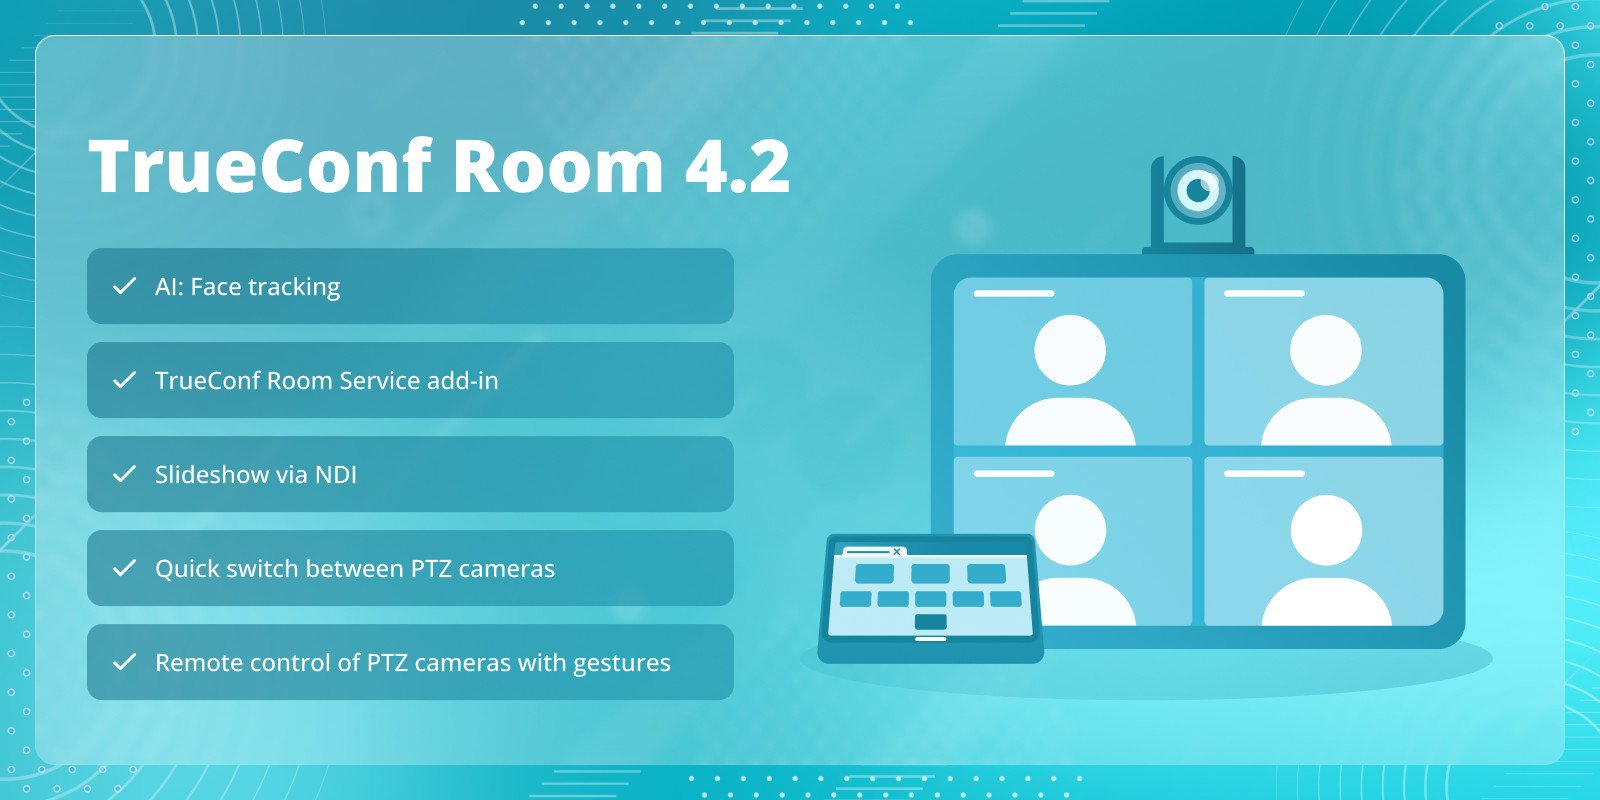 TrueConf Room 4.2: TrueConf Room Service add-in and face tracking 1